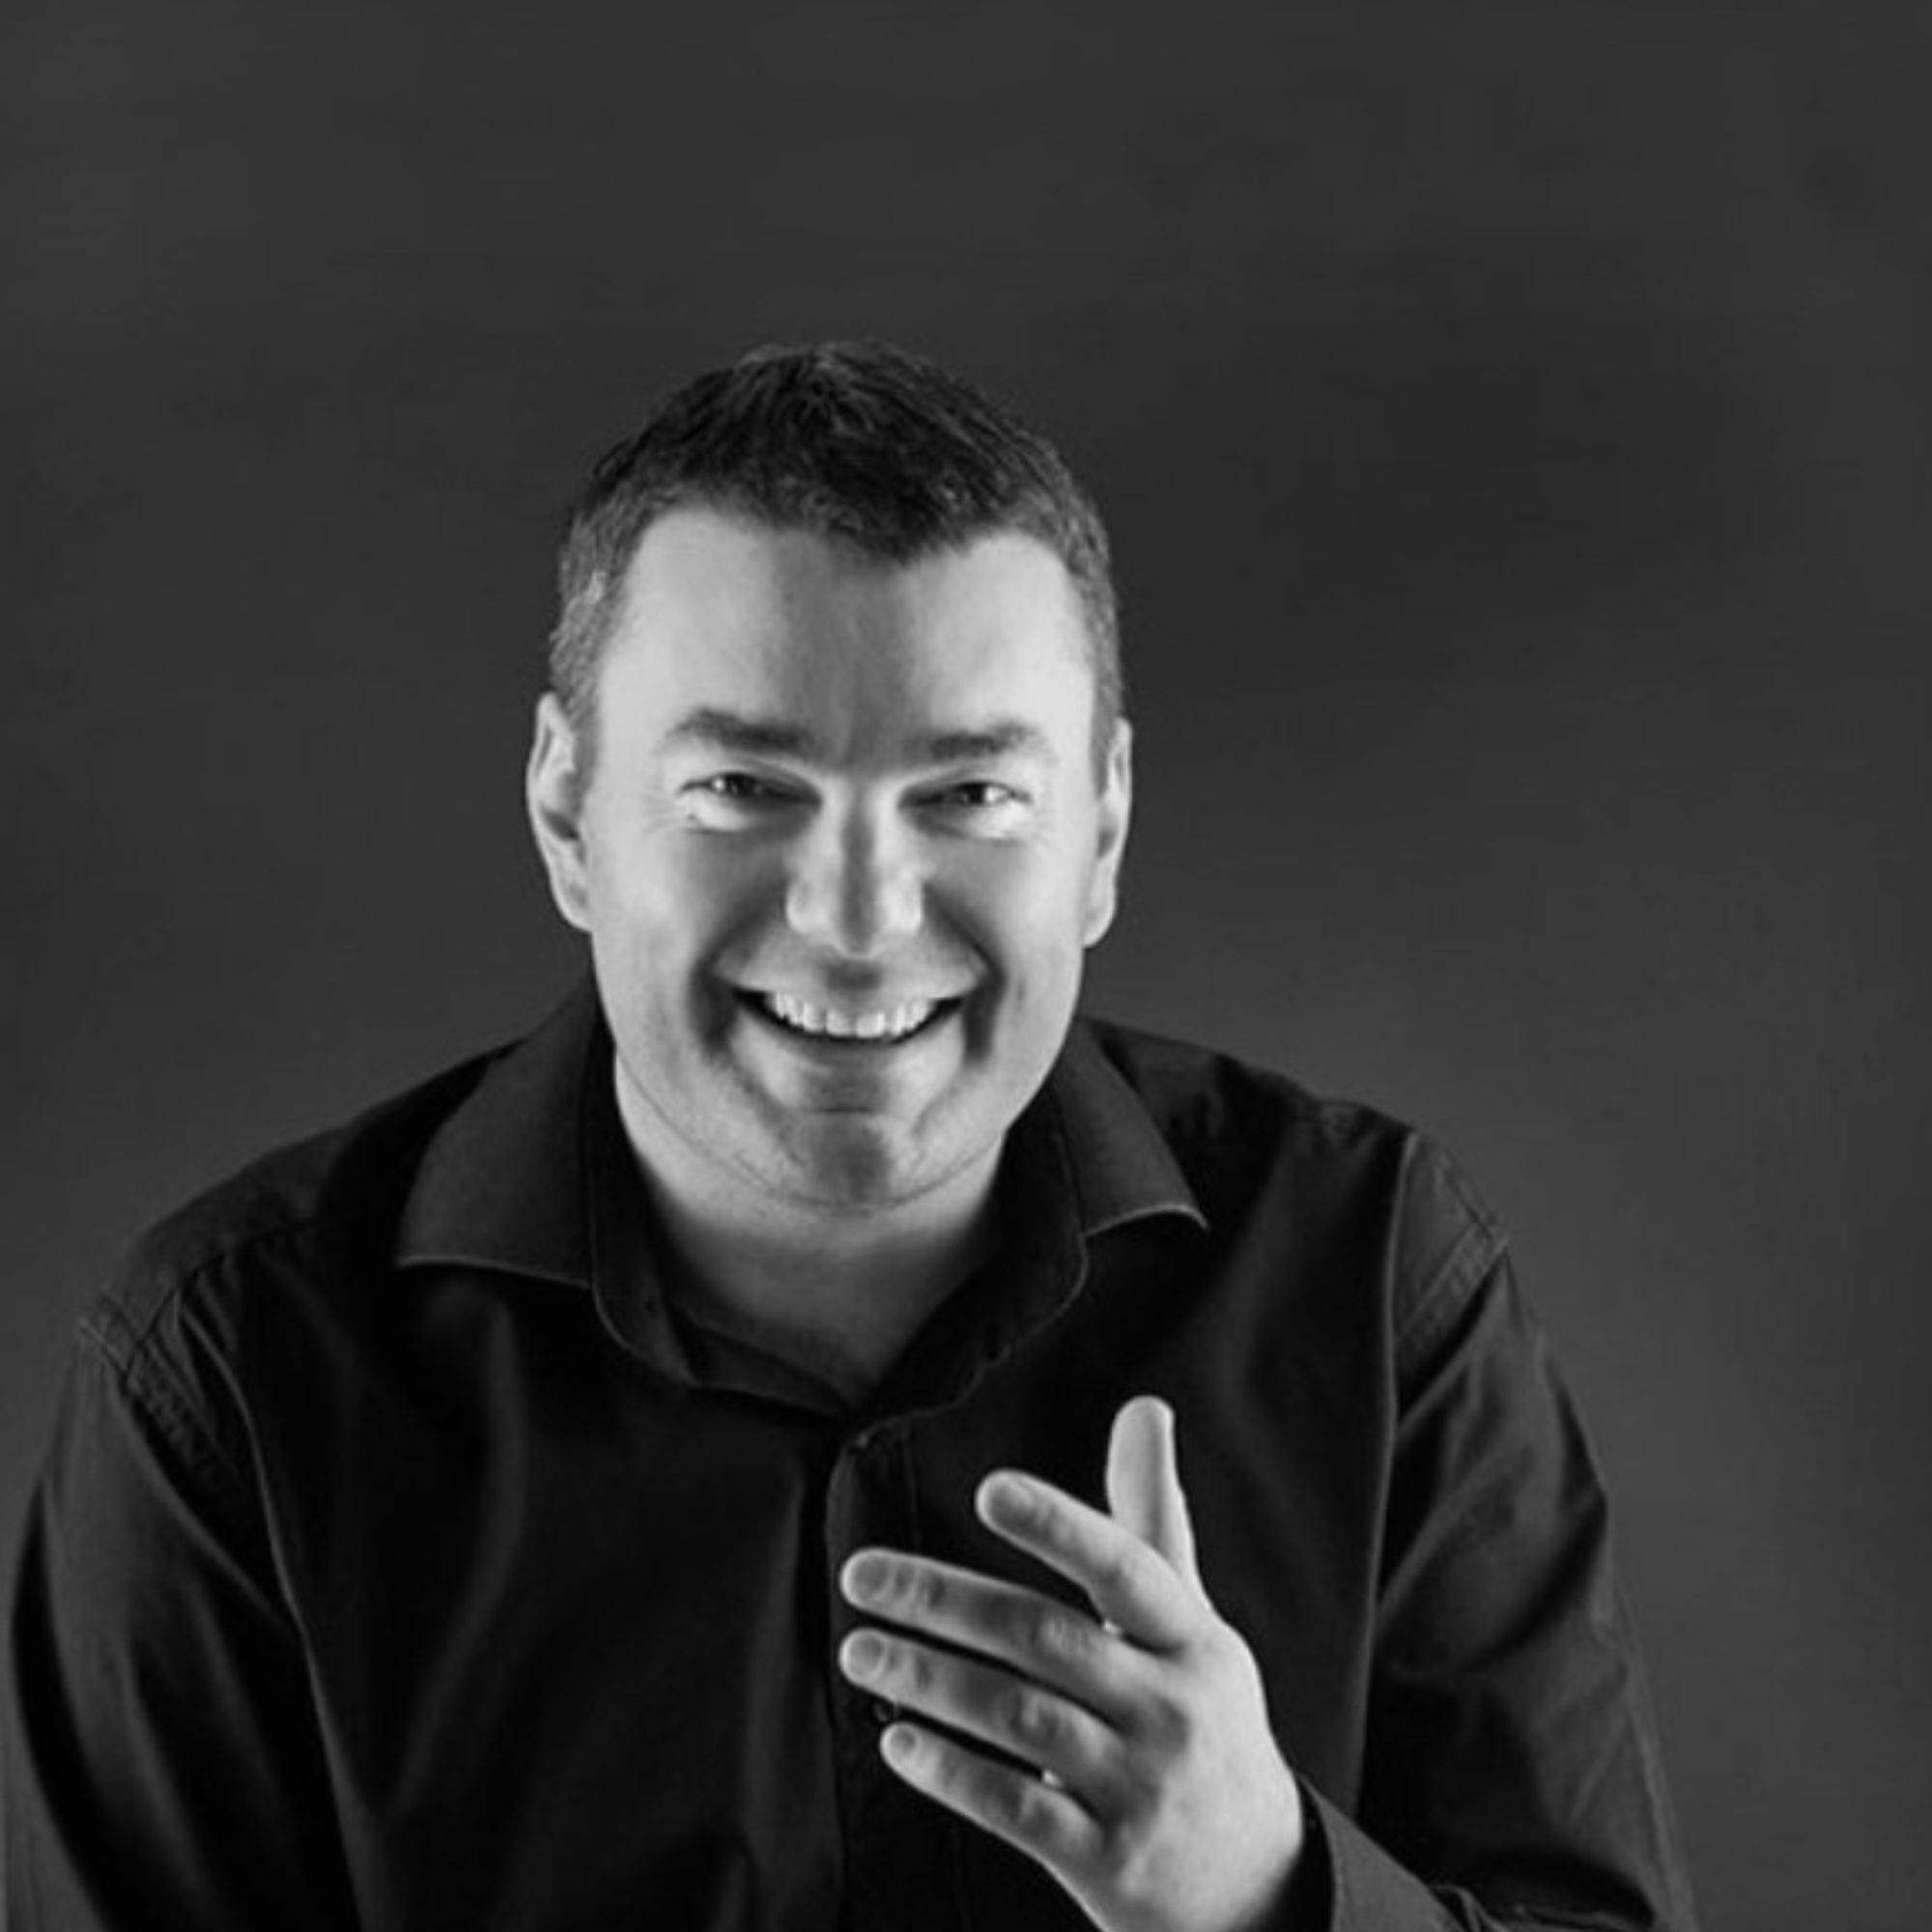 A black and white picture of Ivo Iv, a man wearing a black shirt against a black background